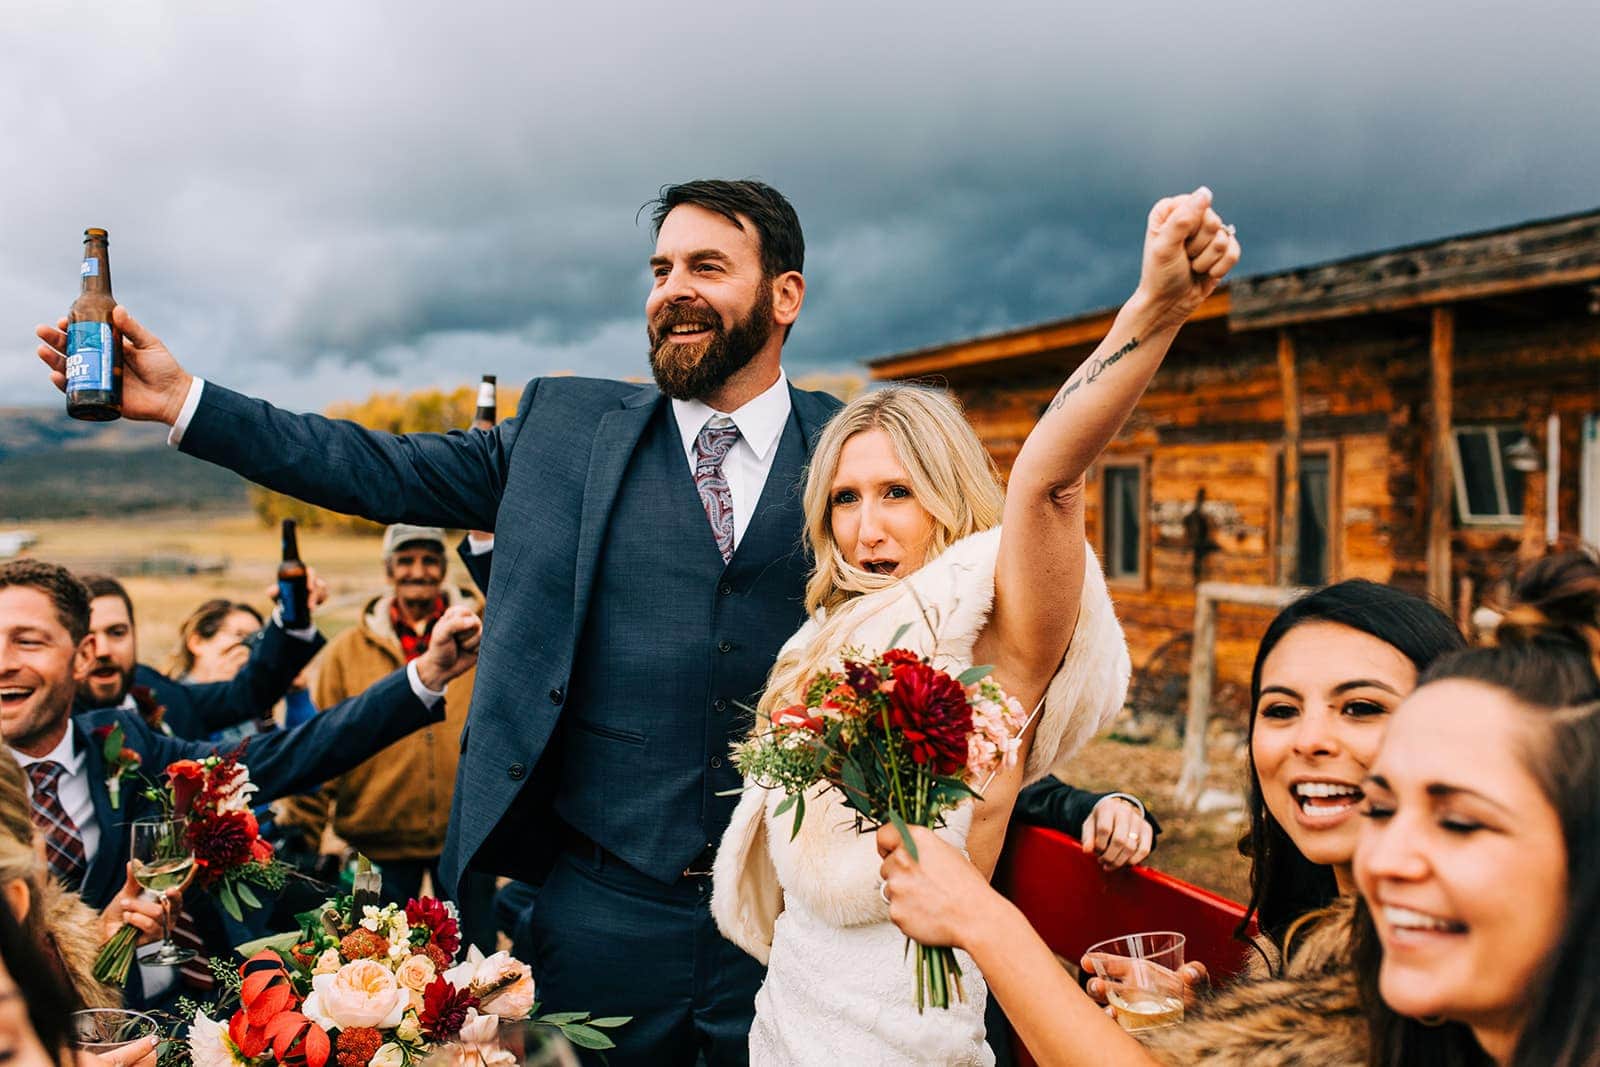 Couple cheering on their wedding day in Colorado